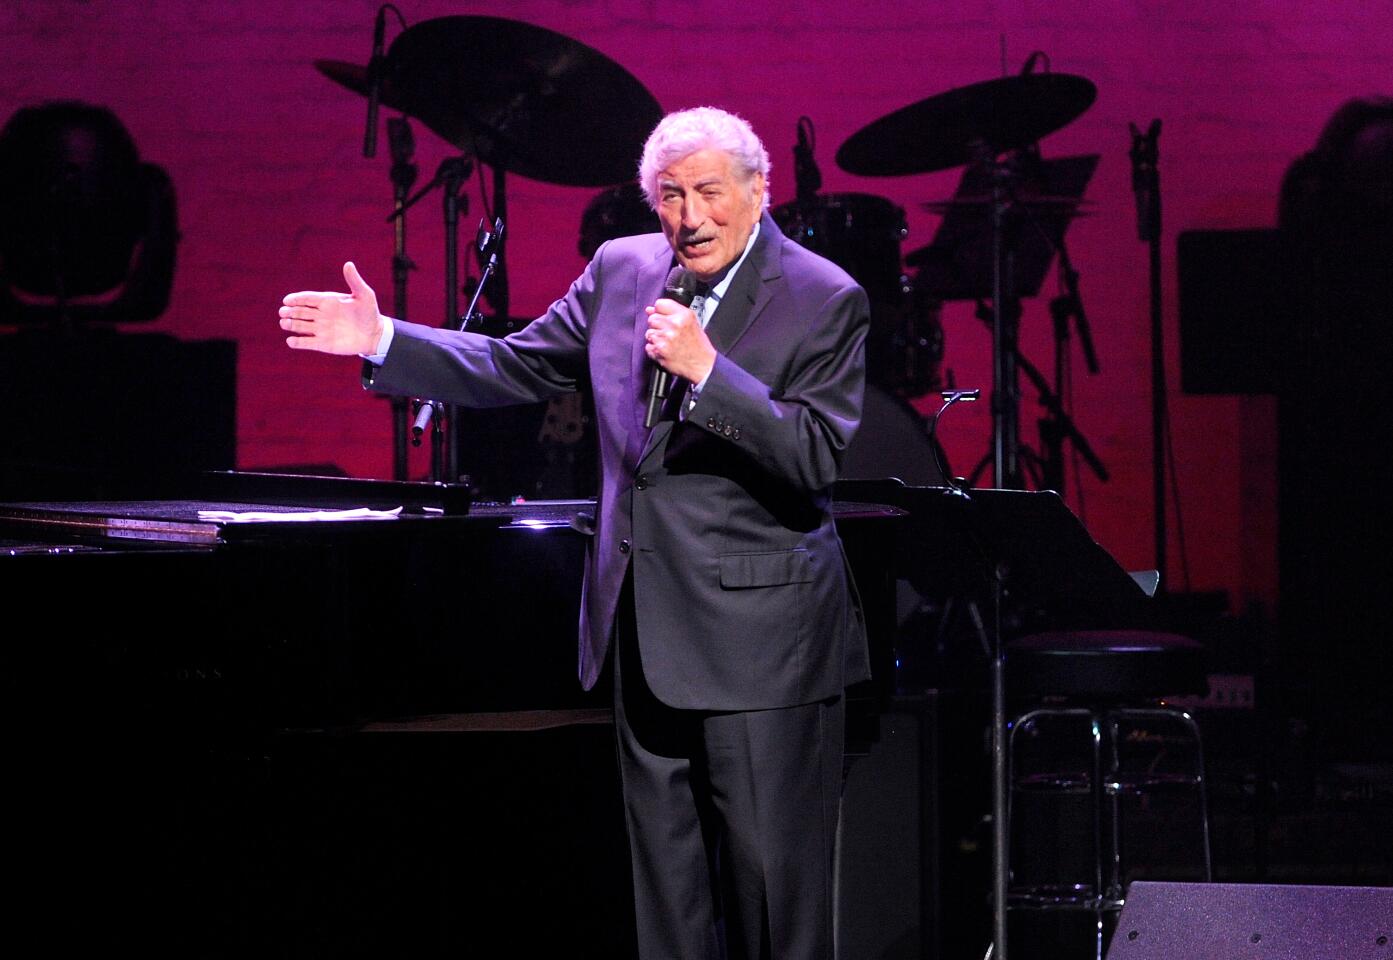 Tony Bennett performs on stage